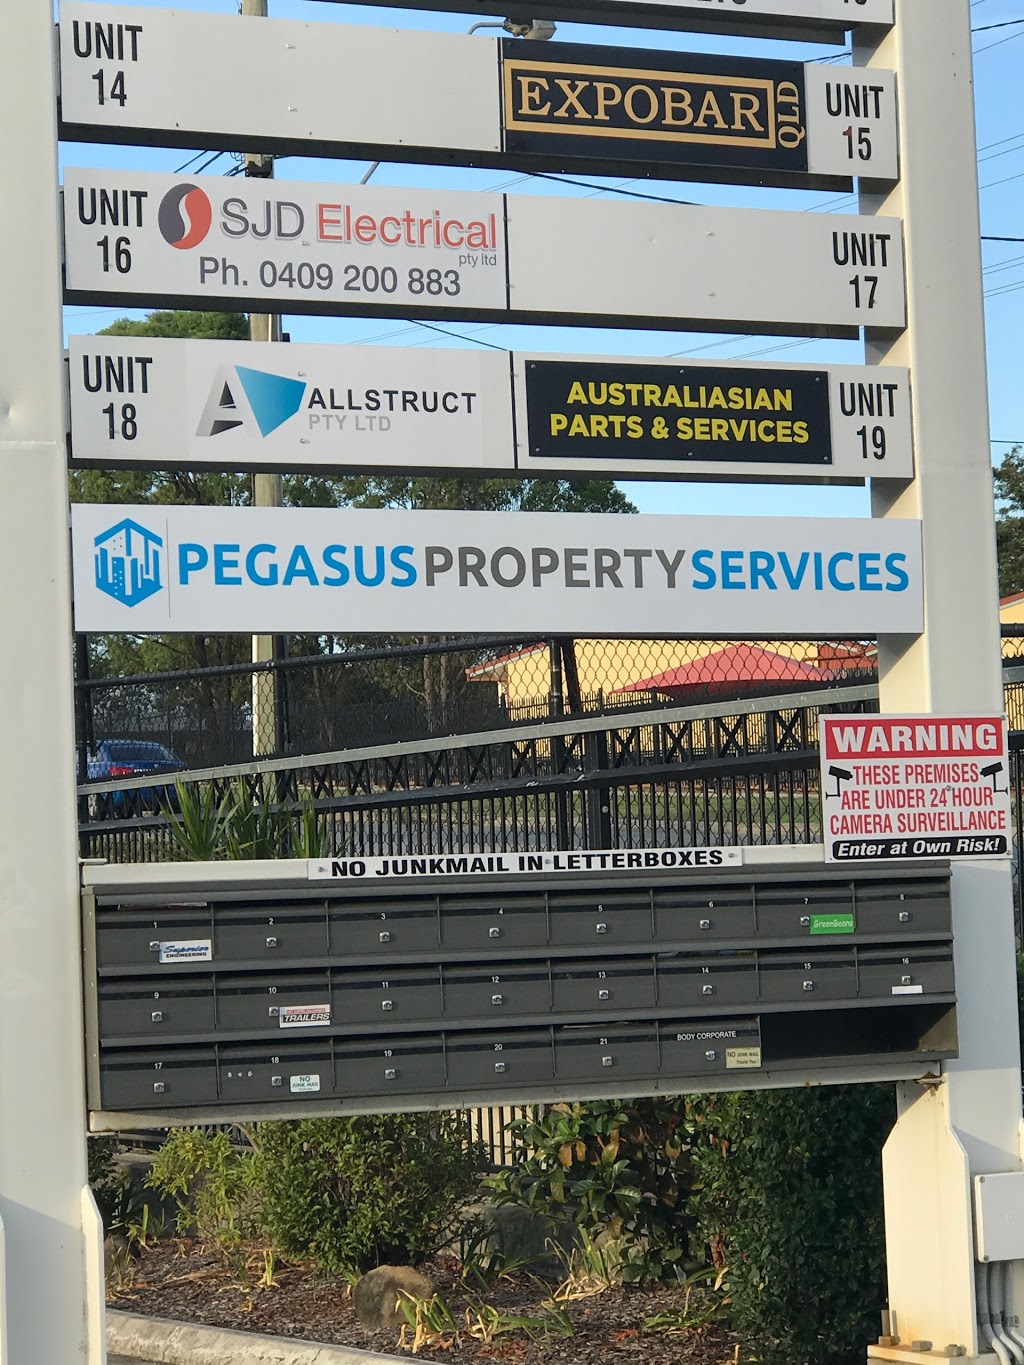 Spectrum Compliance Northside Test And Tag | electrician | Unit 20/116 Lipscombe Rd, Deception Bay QLD 4508, Australia | 1300987010 OR +61 1300 987 010